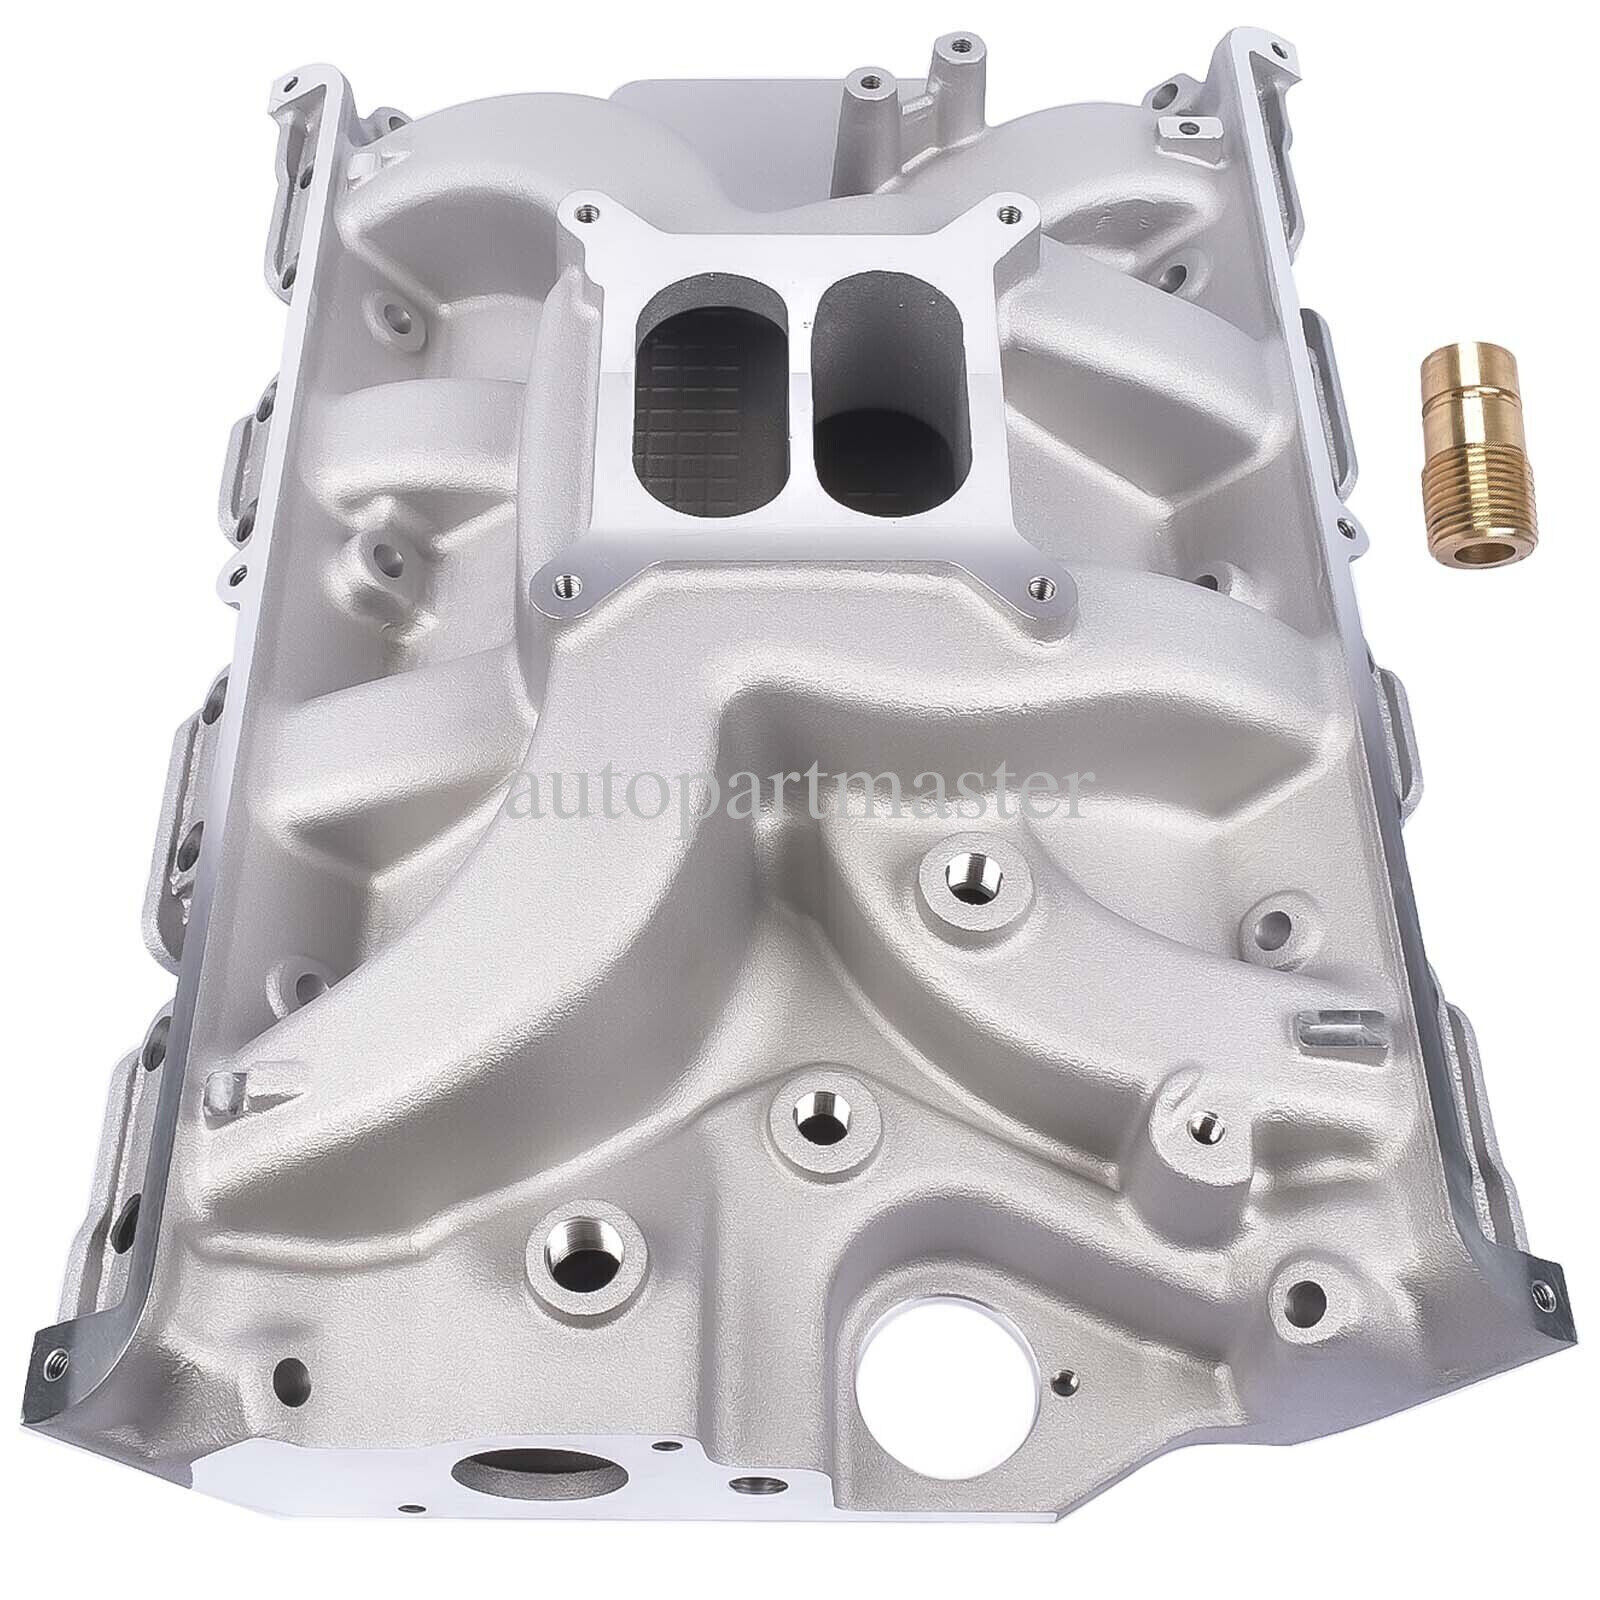 Dual Plane Style Aluminum Intake Manifold Satin 7105 for Ford 352, 360, 390